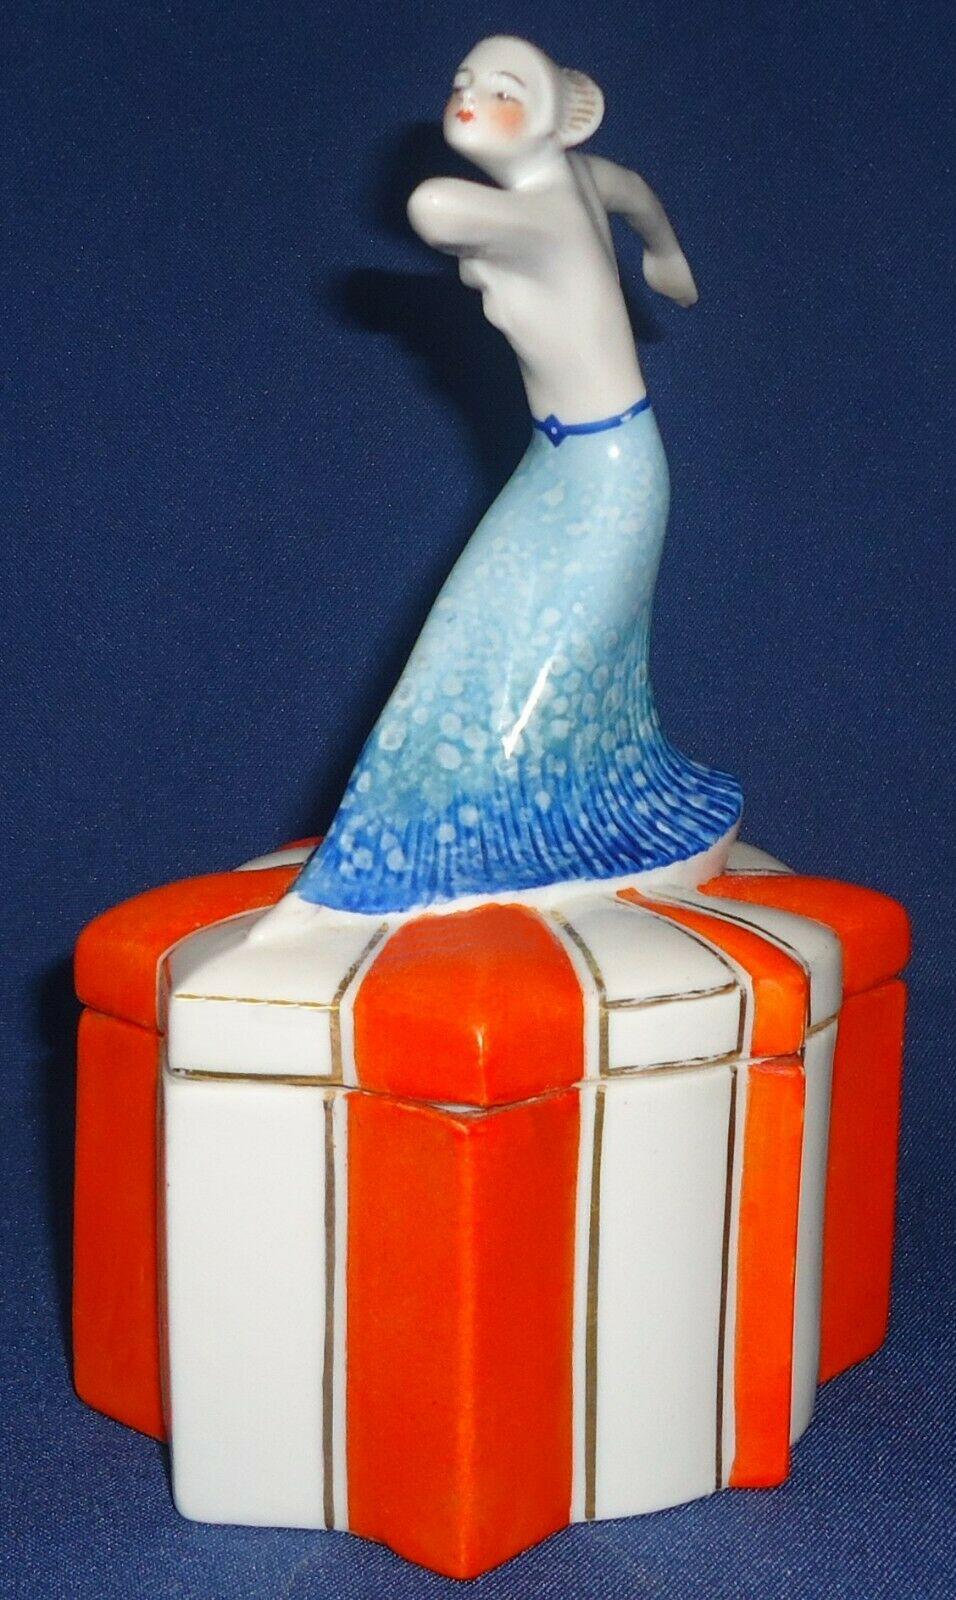 Wonderful 1930s Art Deco ceramic powder box with female dancer depicted on the lid. Beautiful colouring and detailing. A rare design and highly sought after. She's in great condition with no damage or restoration. Moulded on the base are 1734